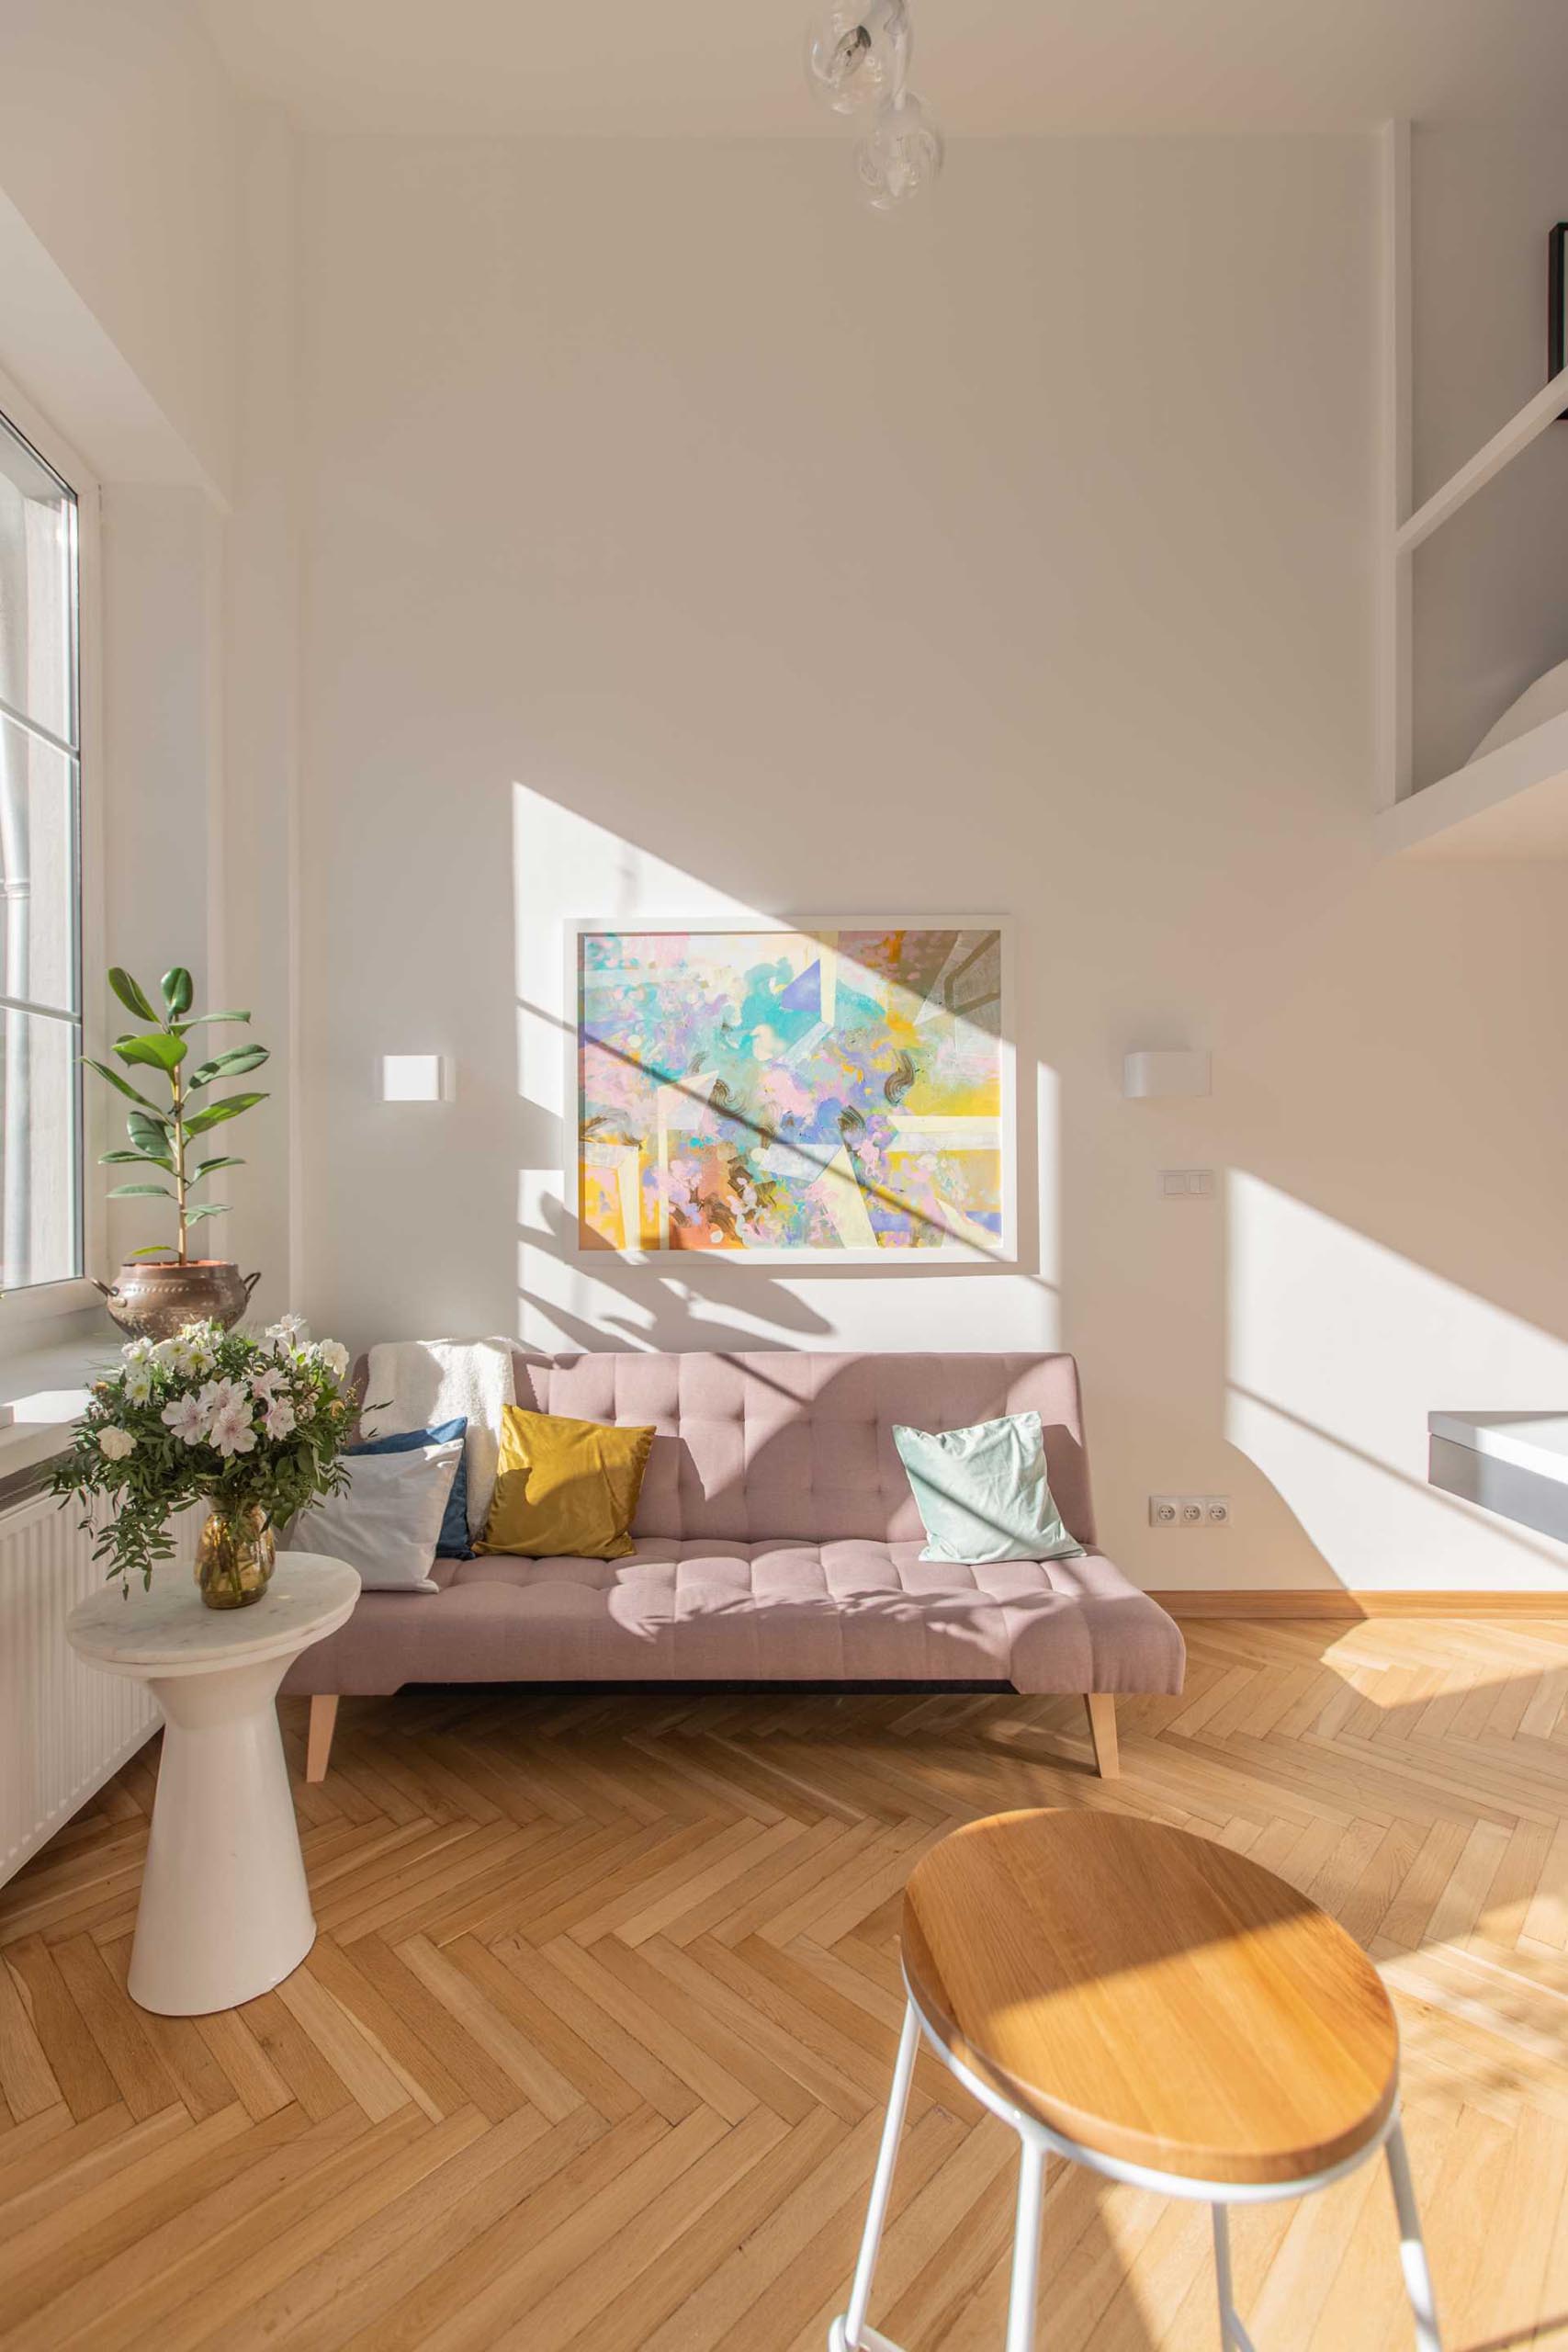 The living room of a small apartment takes advantage of the sunlight.